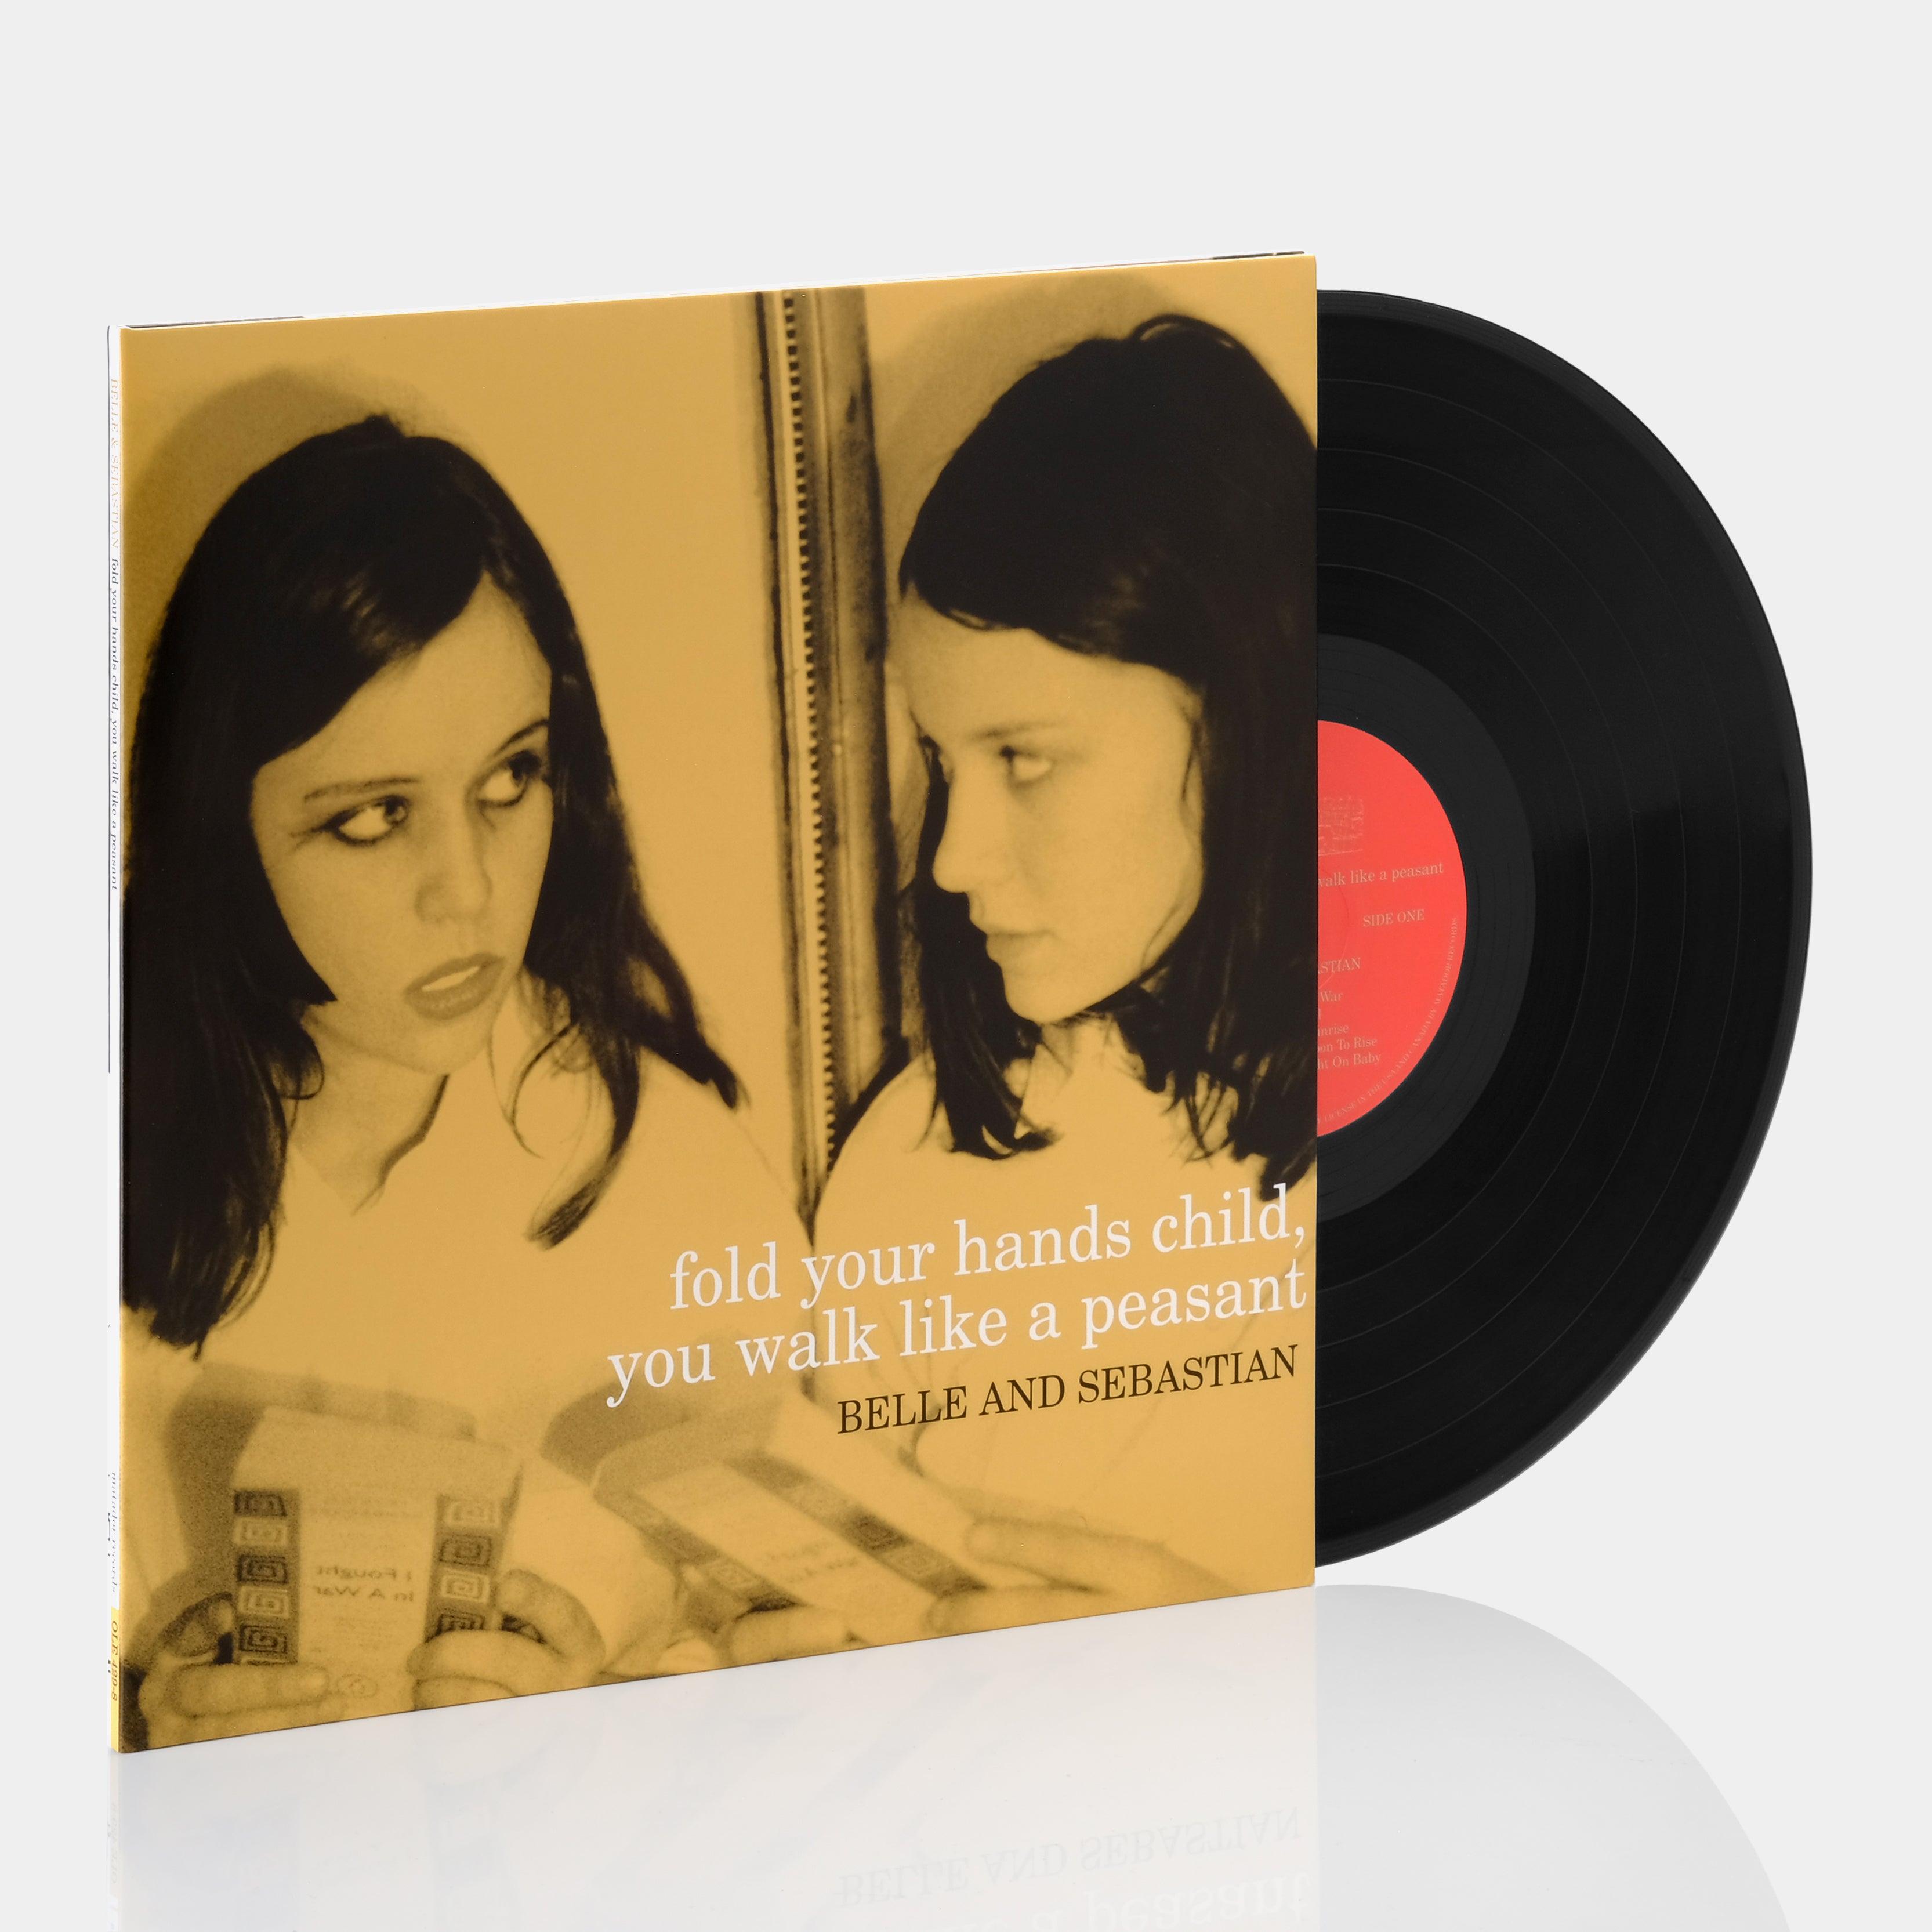 Belle And Sebastian - Fold Your Hands Child, You Walk Like A Peasant LP Vinyl Record